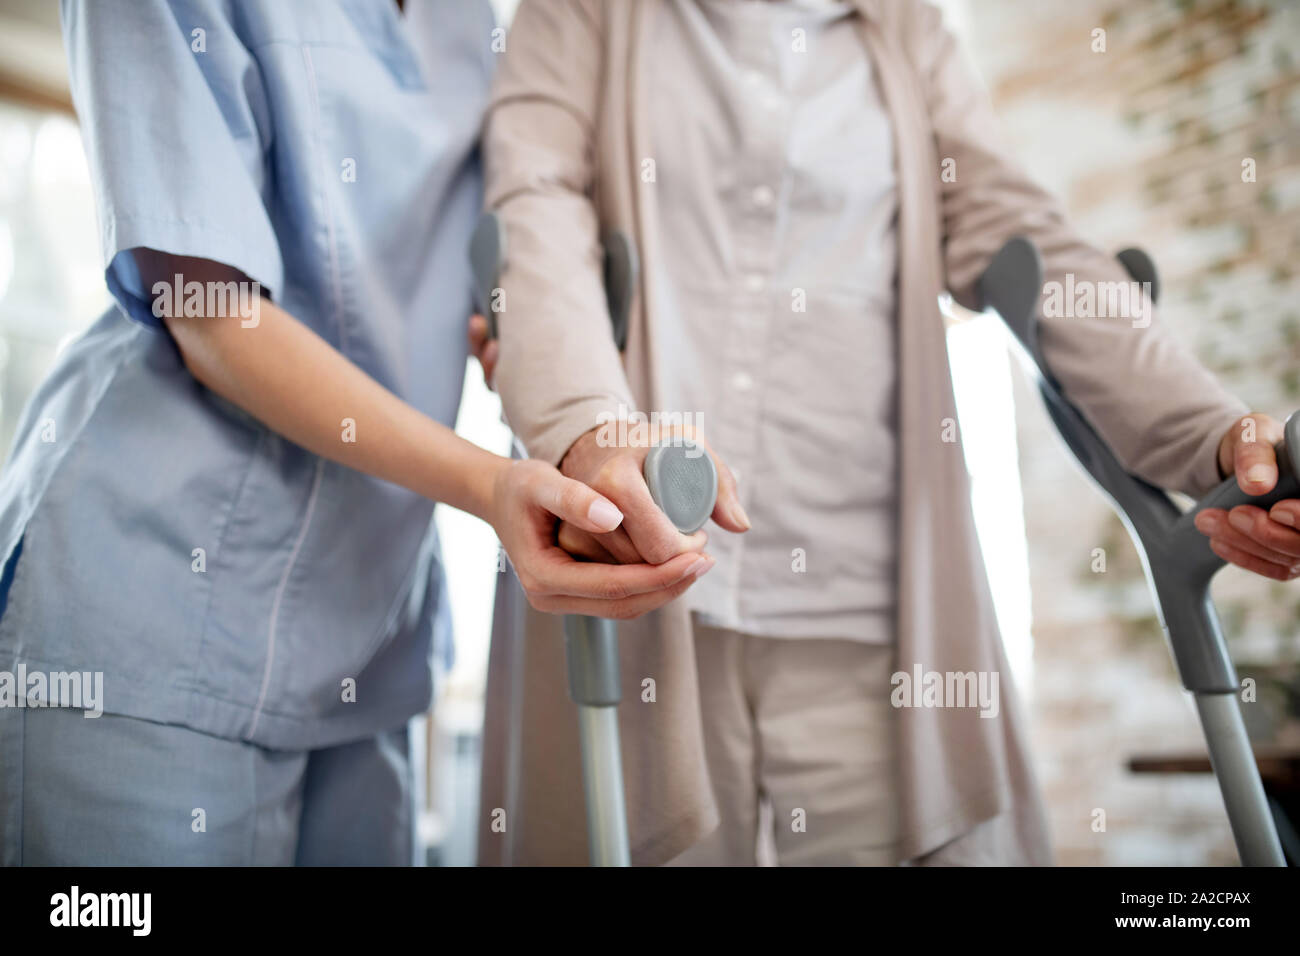 Nurse wearing uniform supporting woman with crutches Stock Photo